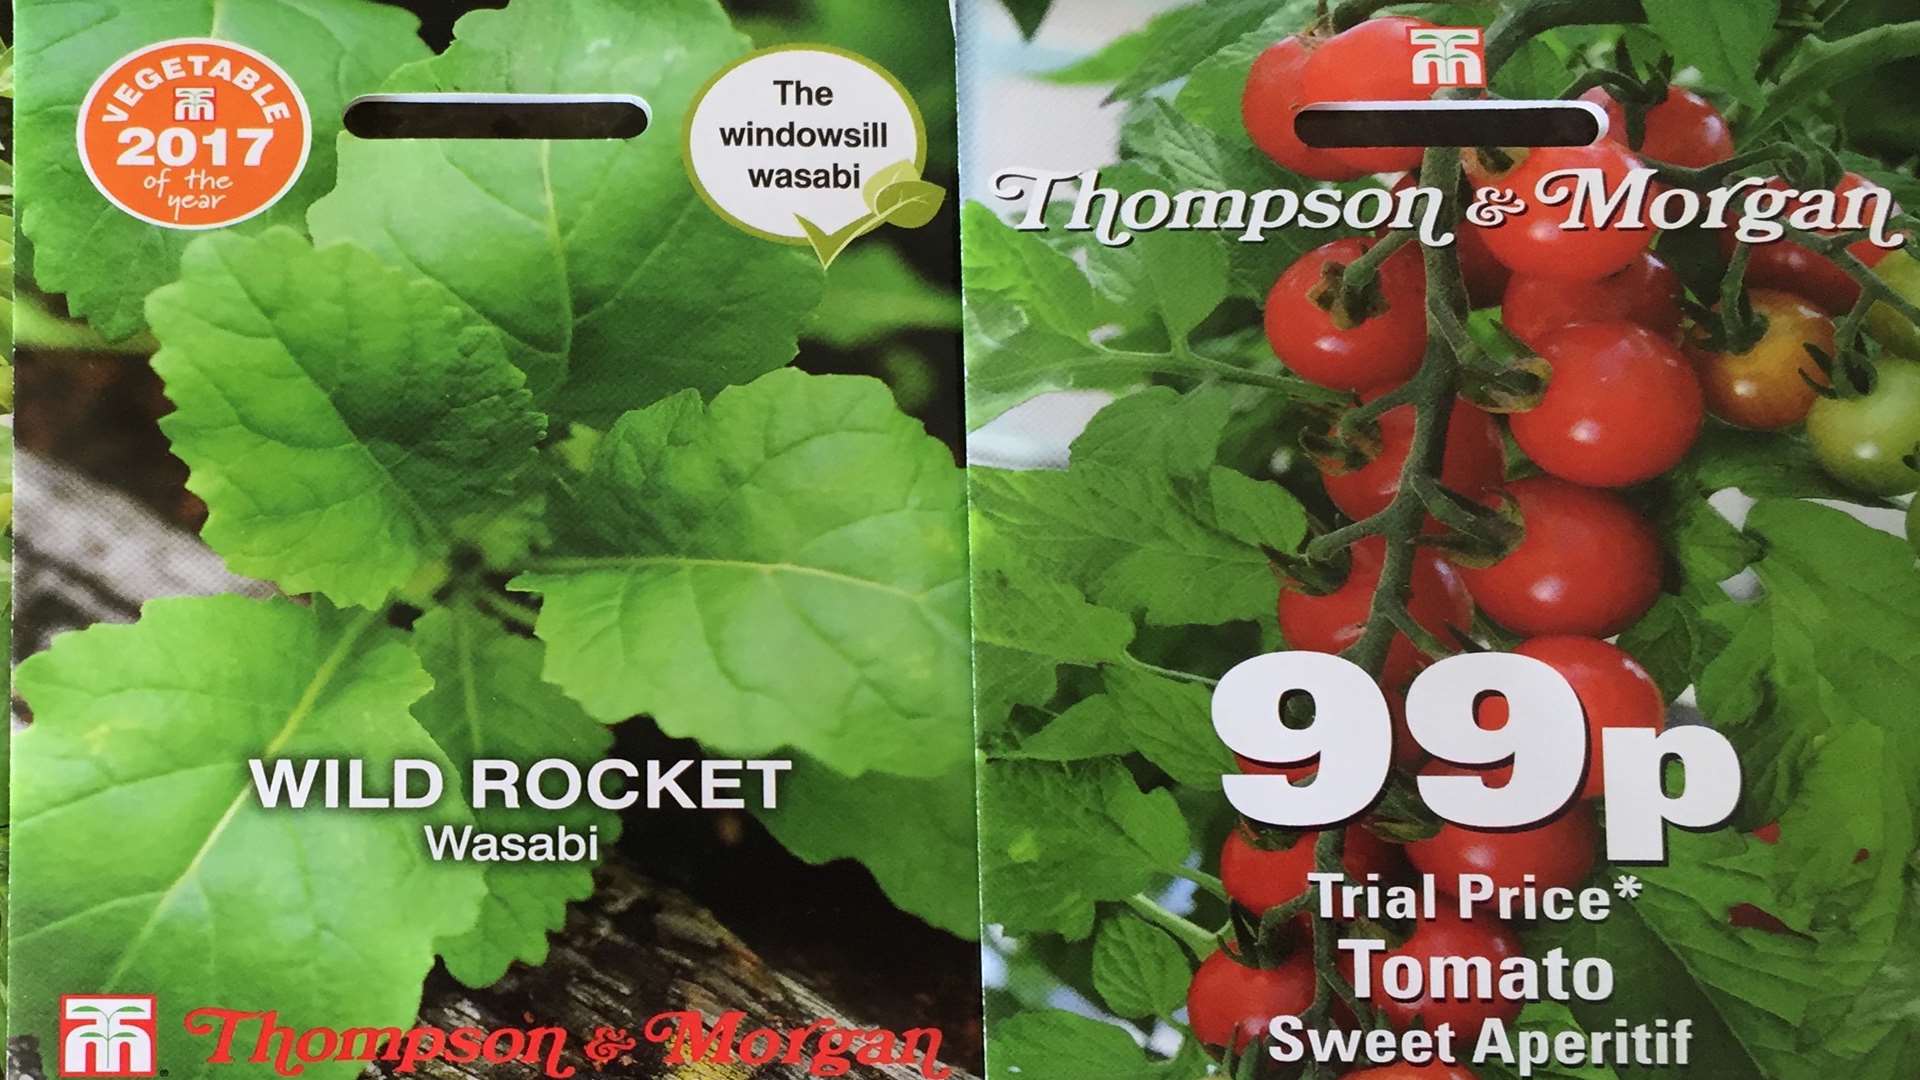 Thomson & Morgan has also introduced new tomatoes to its seeds range